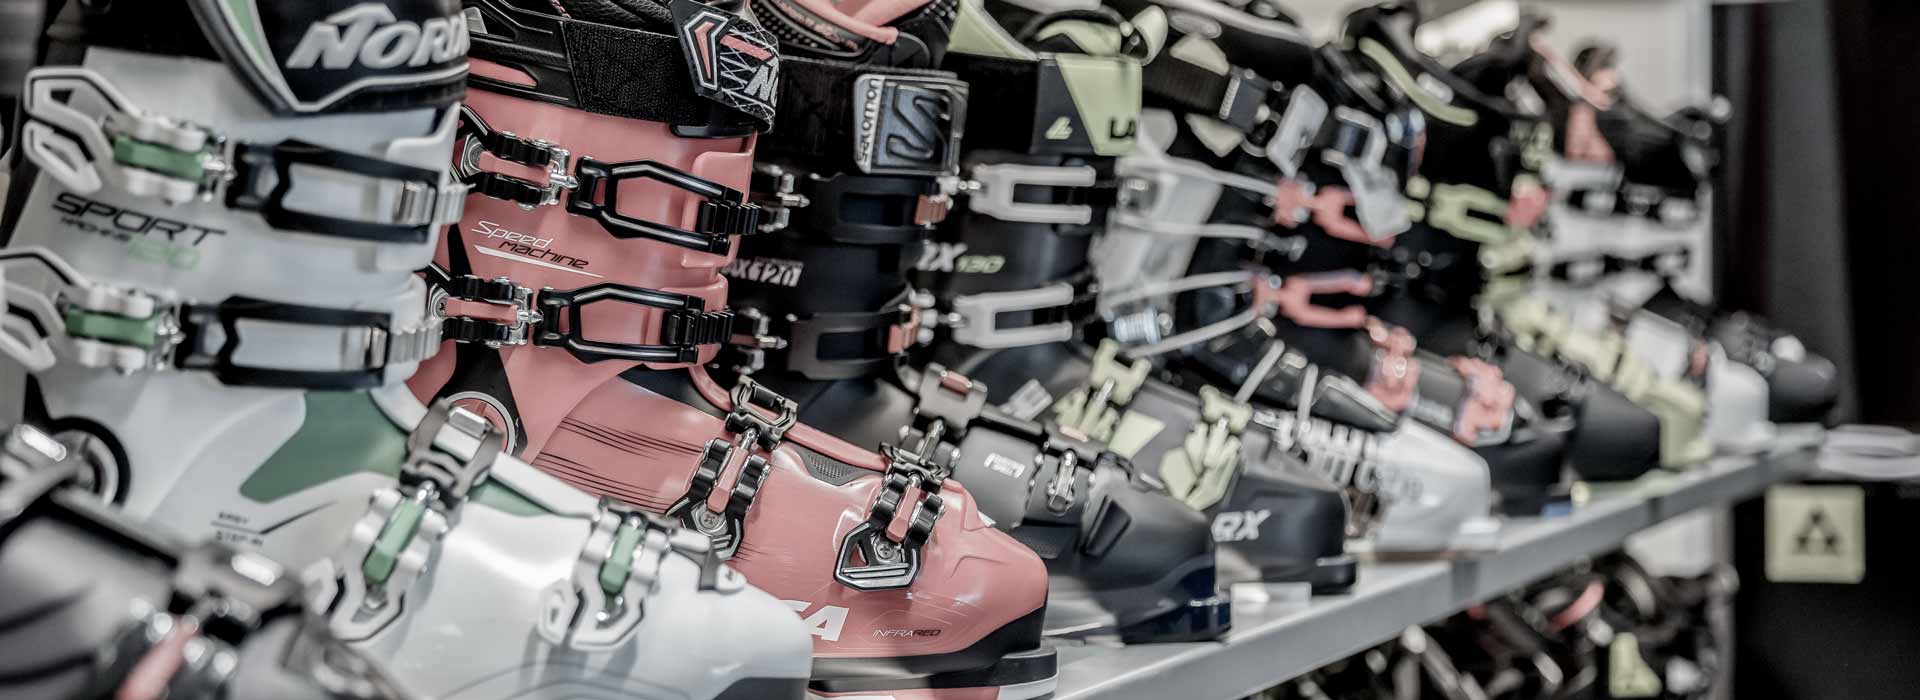 Cutting-edge ski boots and ski equipment is purchased at RIML Sports